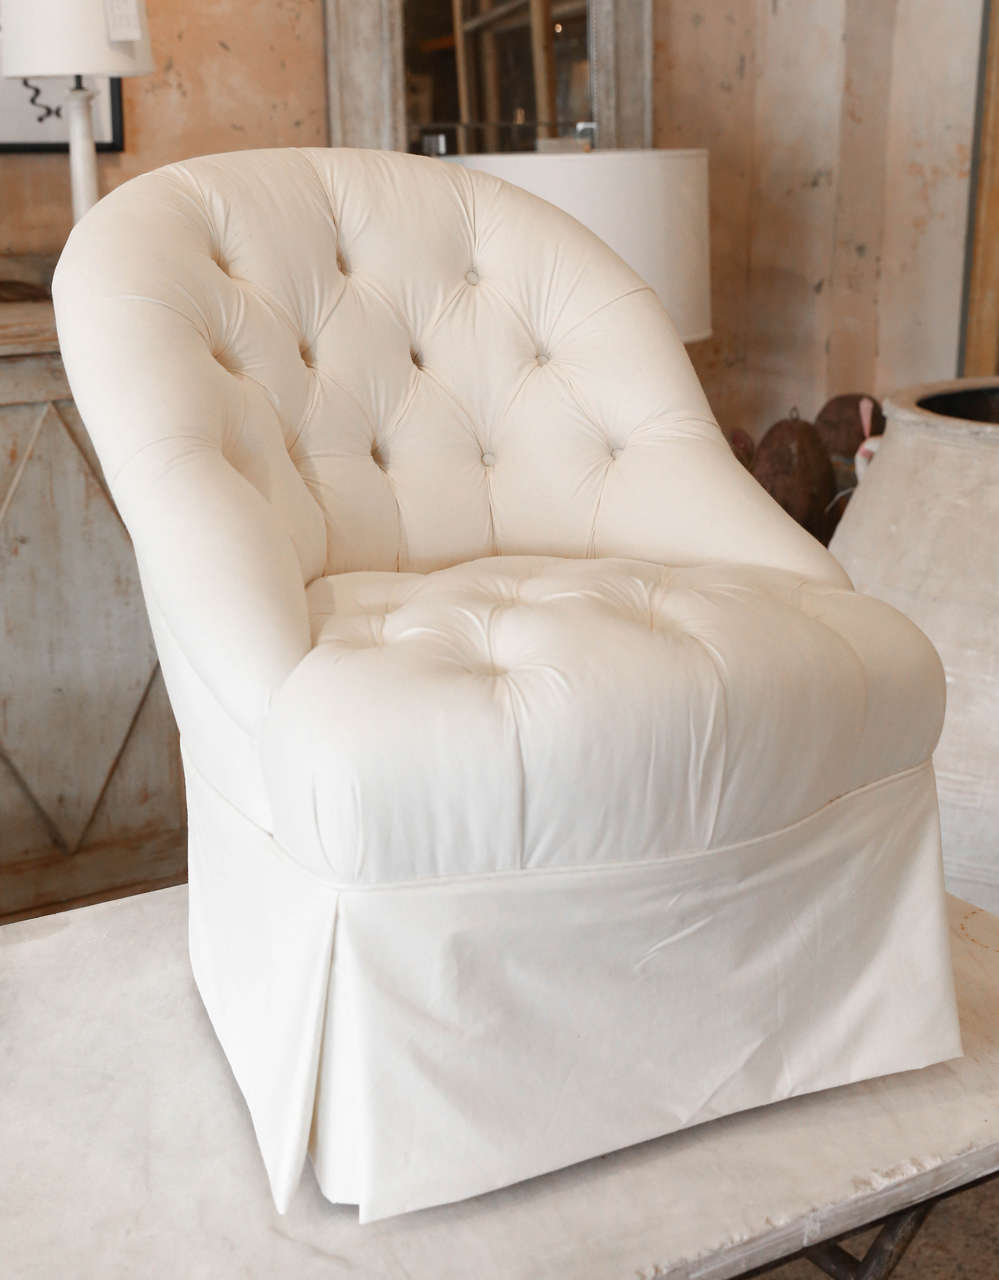 Newly upholstered slipper chair, tufted,and in ticking.